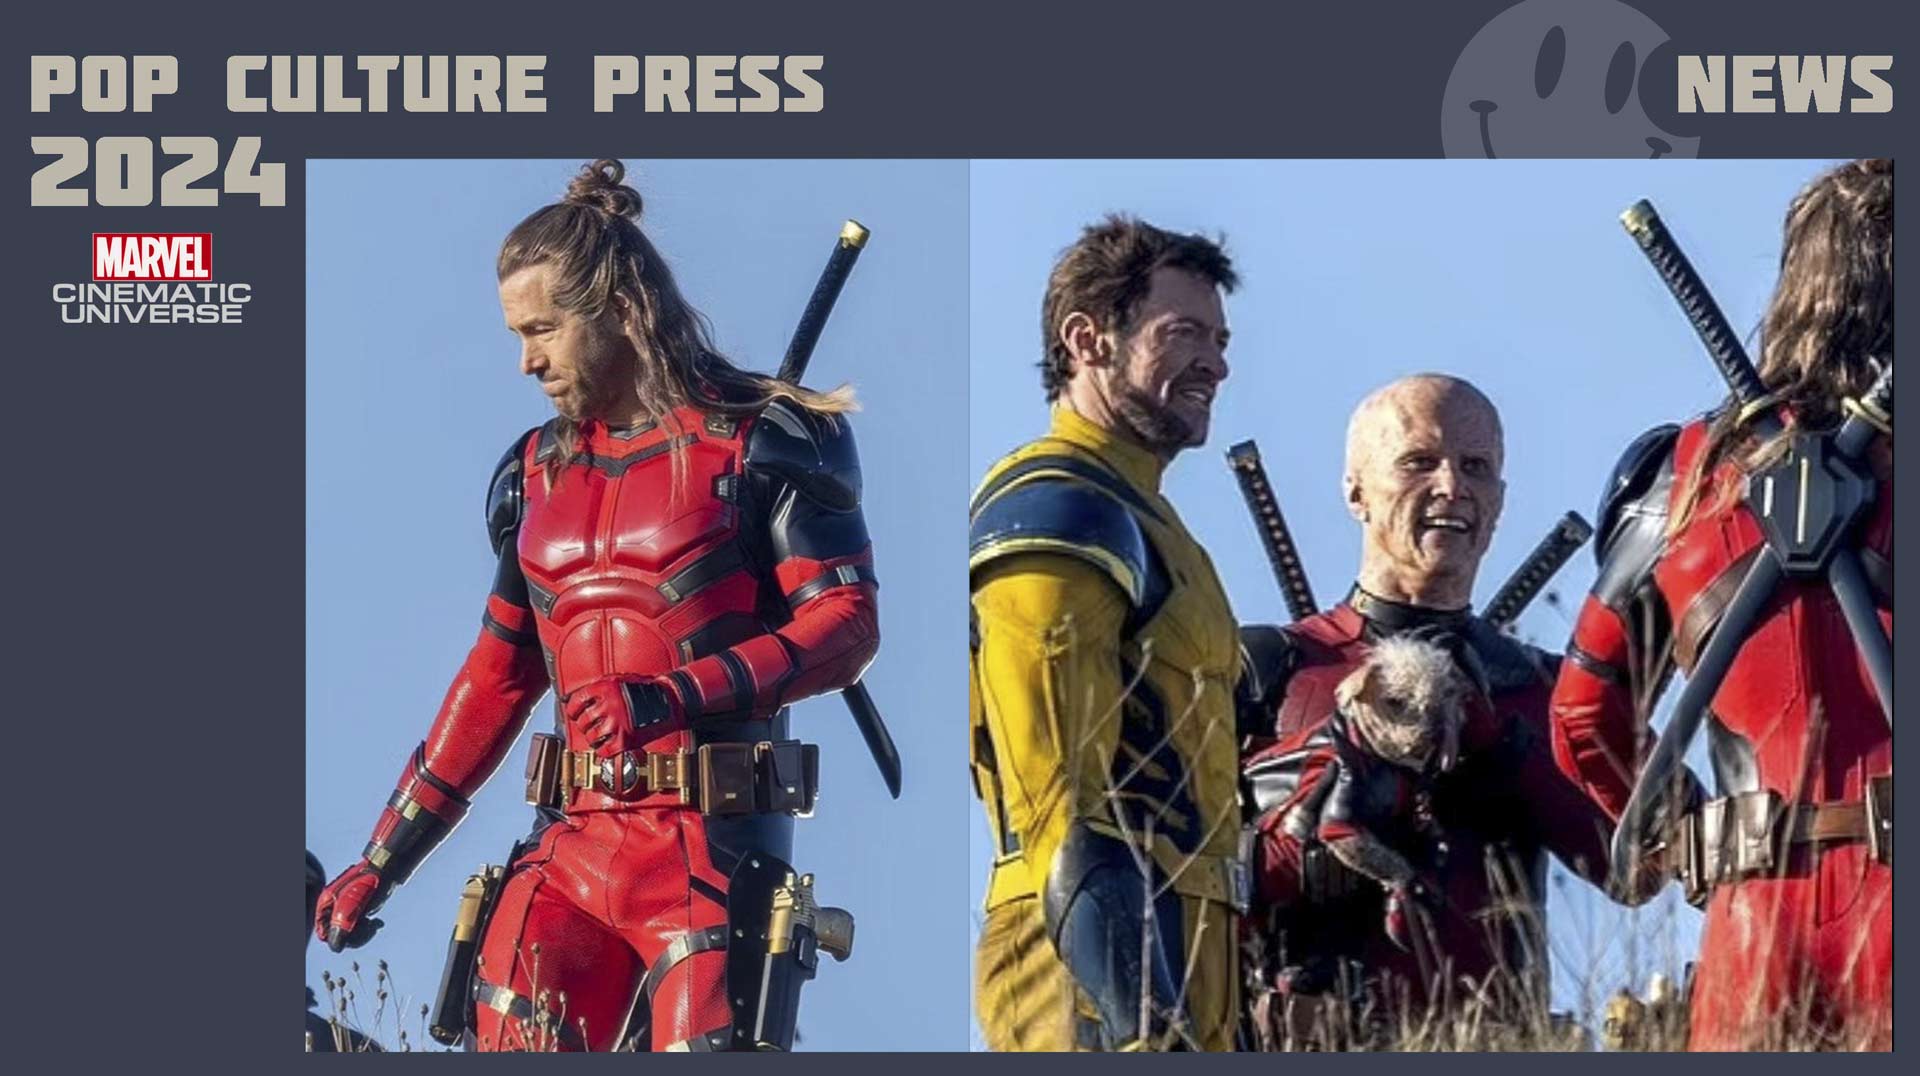 Deadpool III set photos with Wolverine in yellow suit, Ryan Reynolds as Deadpool variant, and Dogpool, featuring outdoor shots with camera crane.